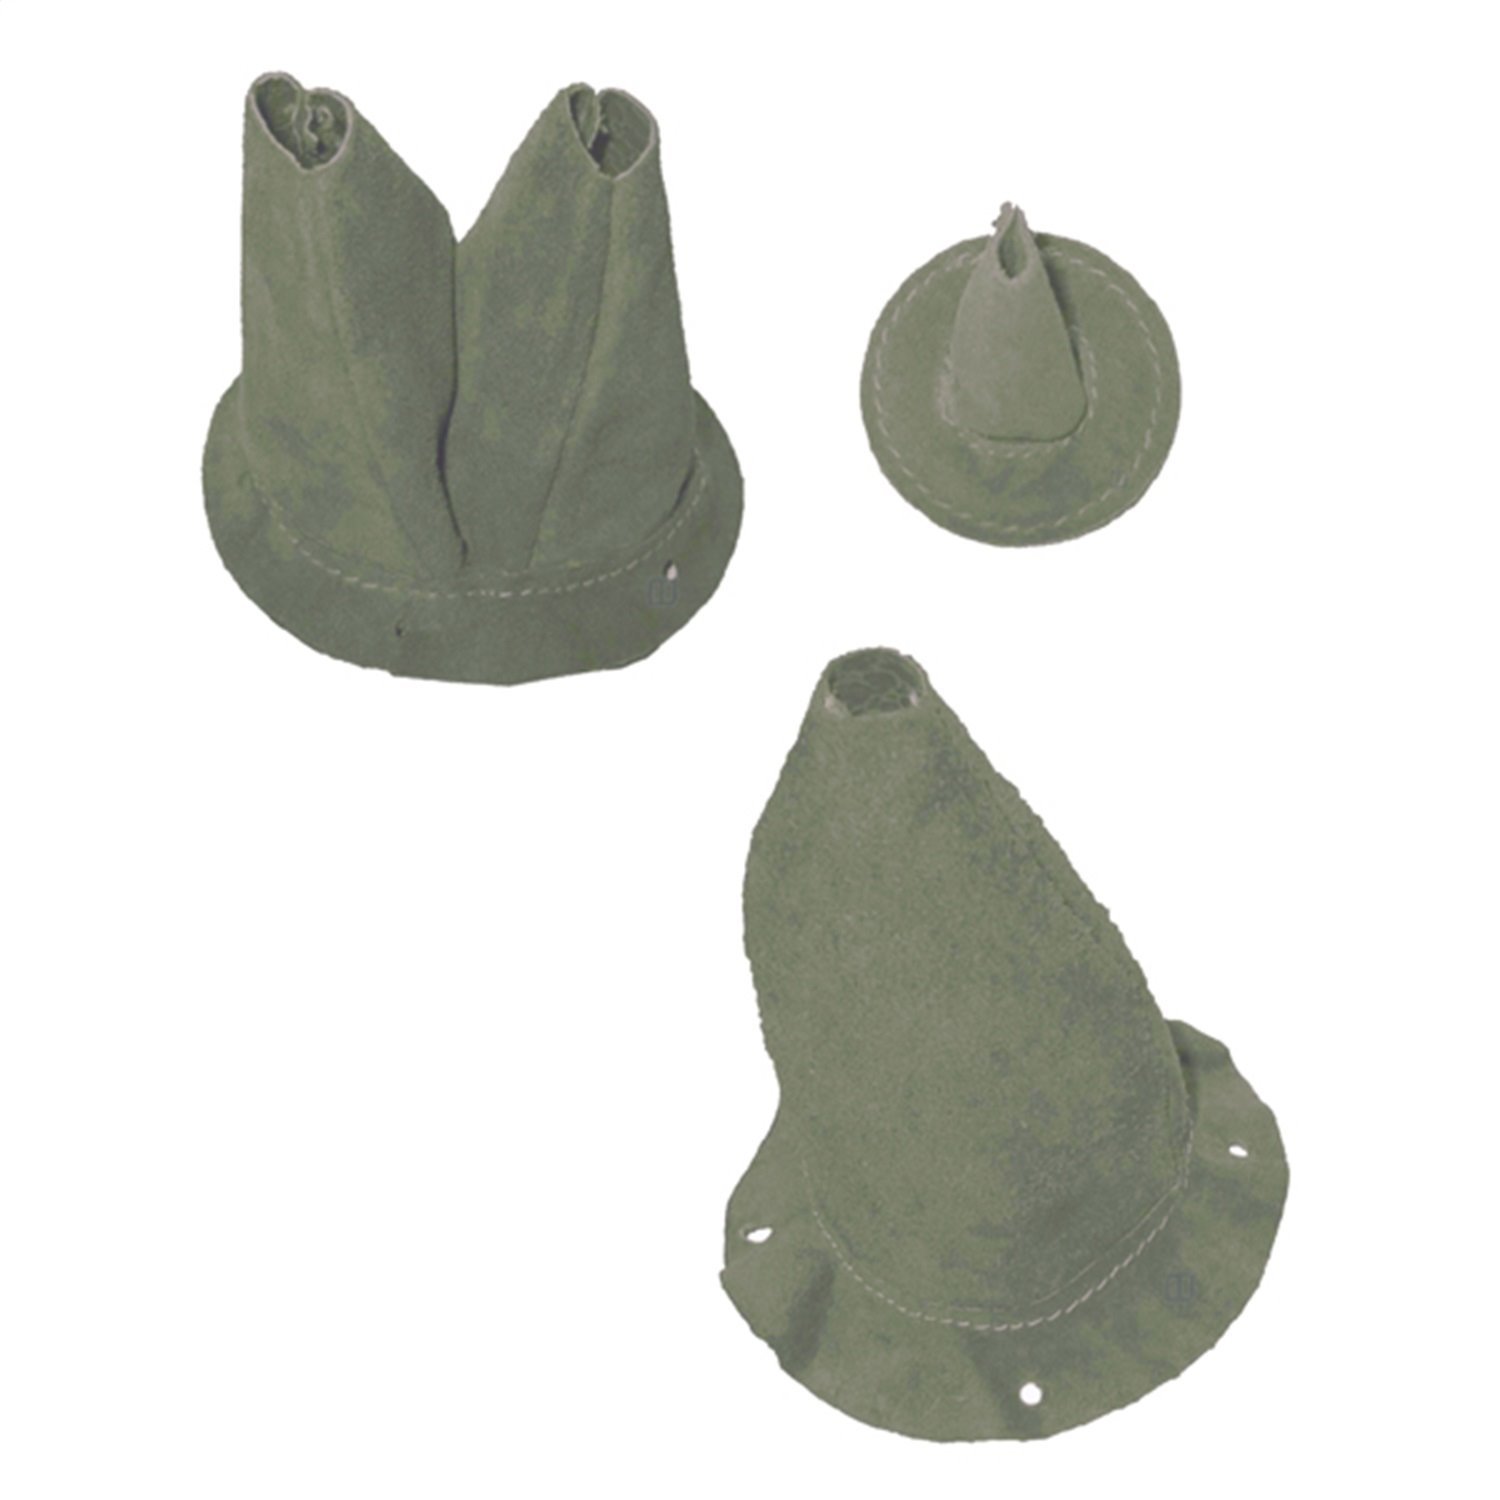 LEATHER BOOT KIT 3 pieceS 41-45 MB-GPW PEA GREEN COLOR 3 pieceS FOR TRANSMISSION TRANSFER CASE AND ACCELERATOR ROD COVER